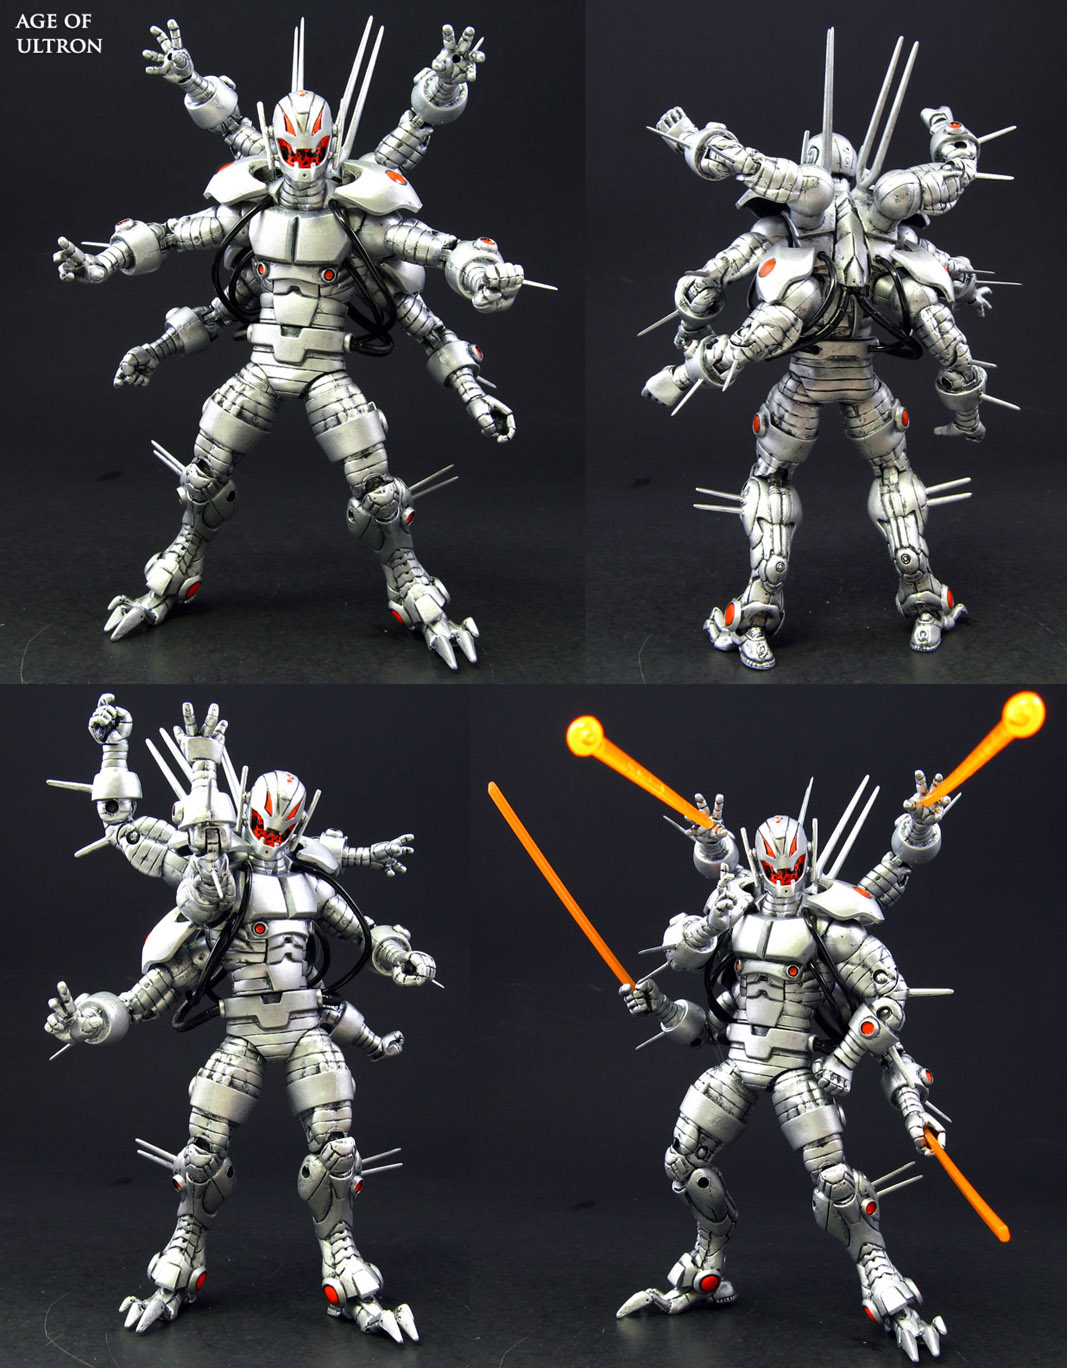 Age of Ultron custom Marvel Legends figure by JinSaotome